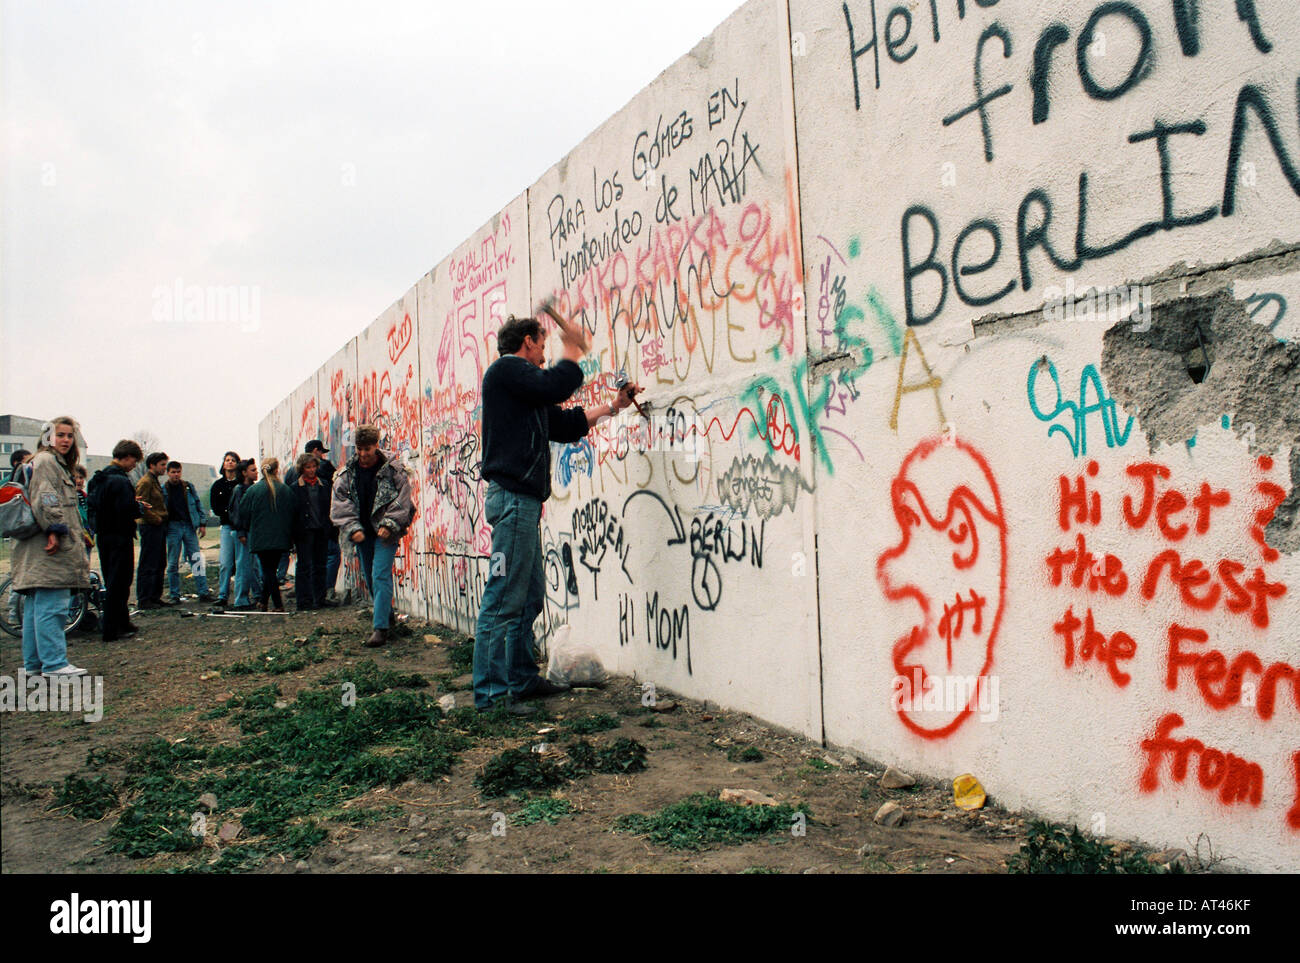 The Fall of the Berlin wall, 1989. A souvineer hunter cuts pieces of the wall. Stock Photo